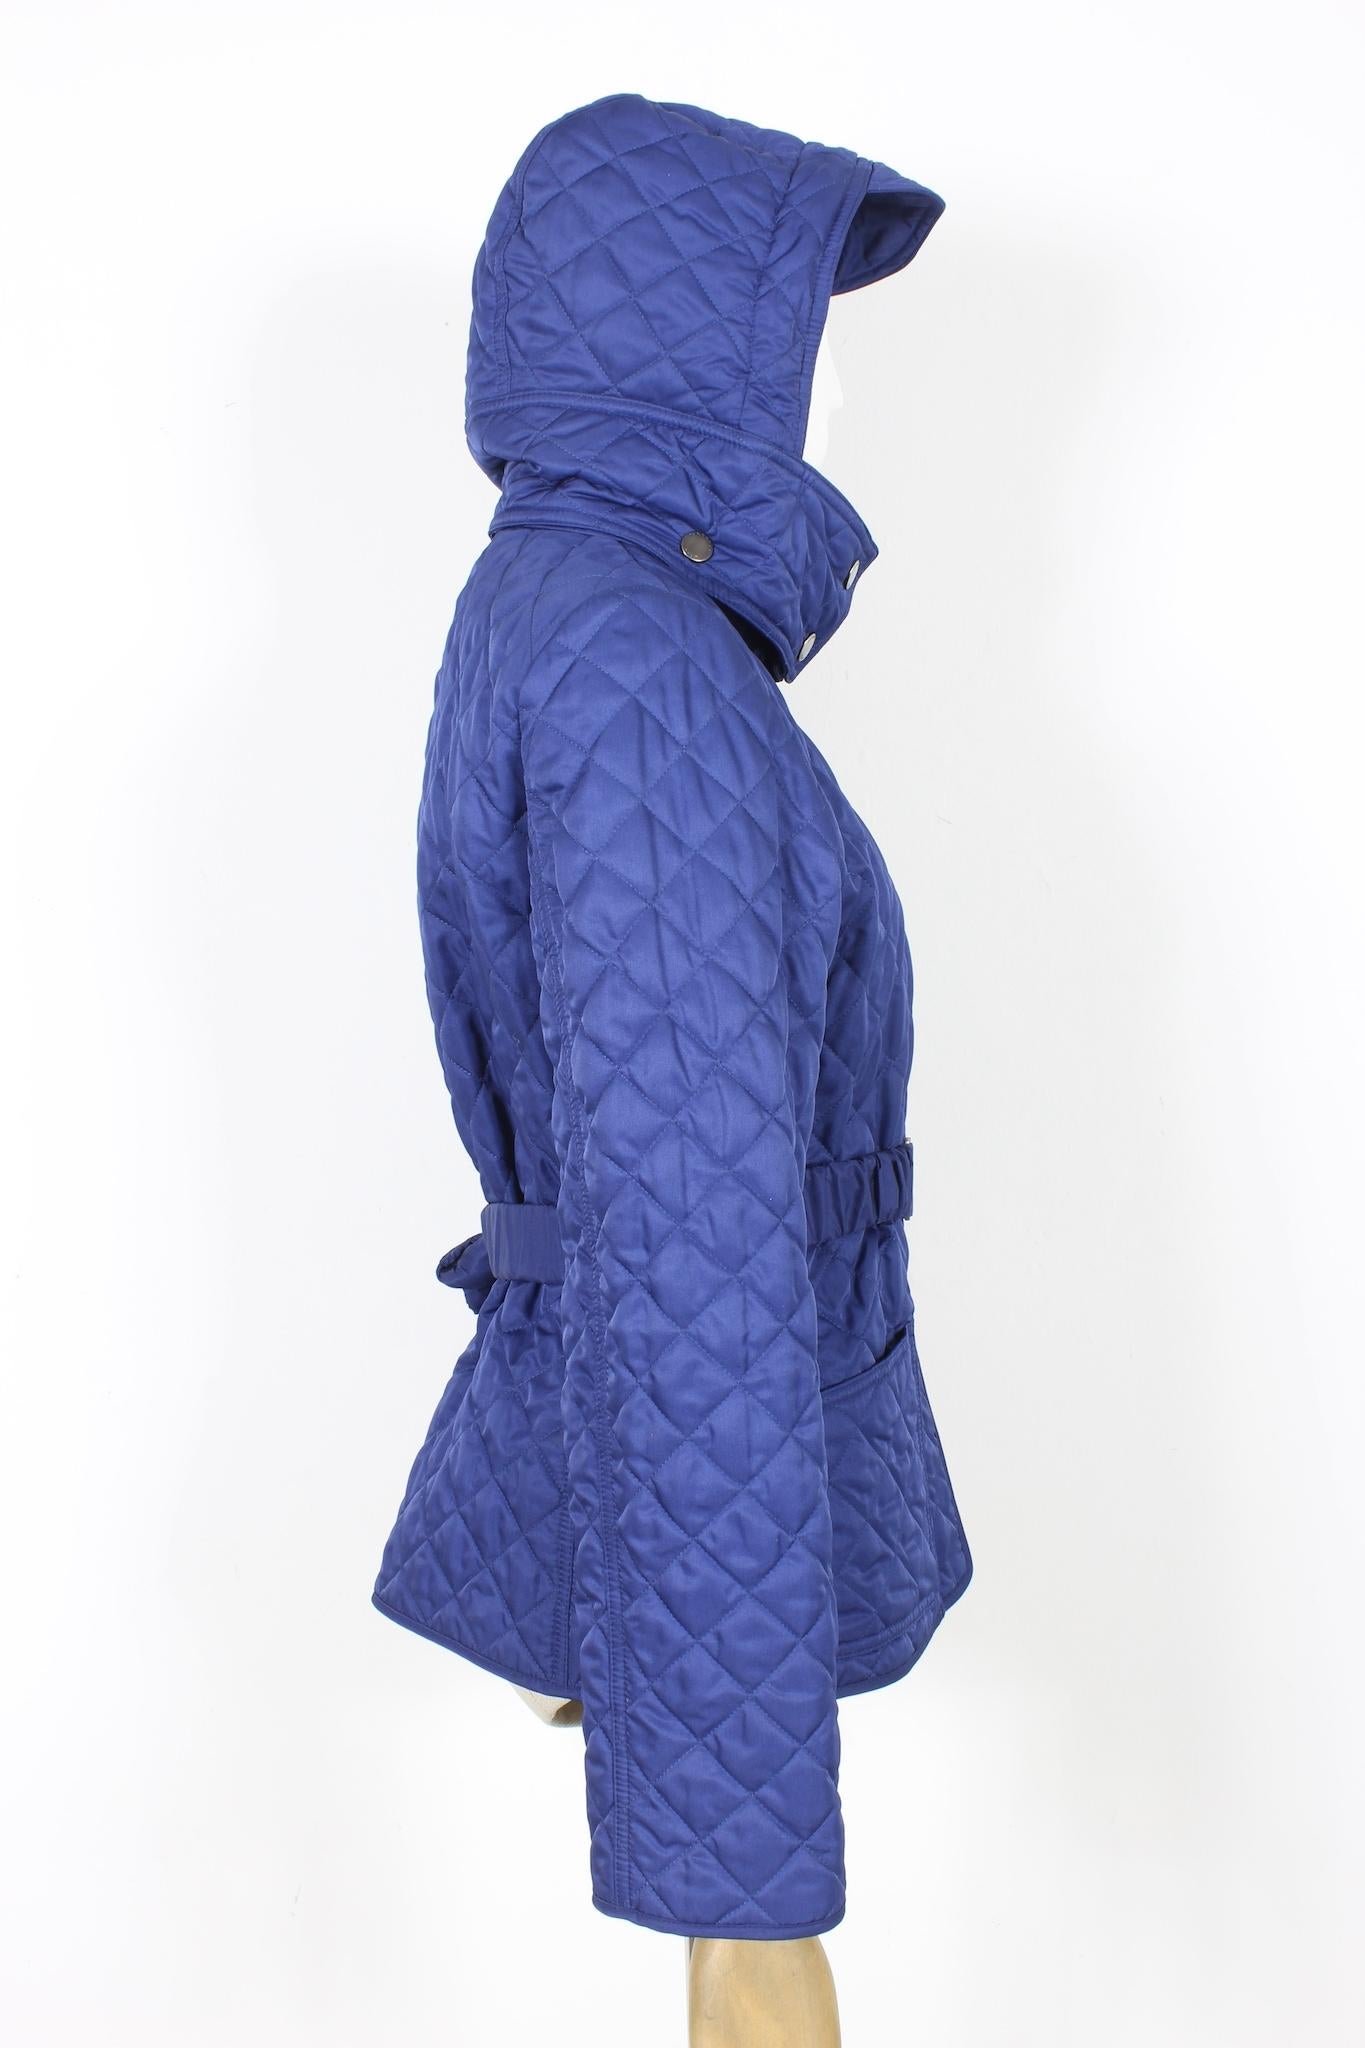 Burberry Blue Quilted Jacket 2000s In Excellent Condition For Sale In Brindisi, Bt